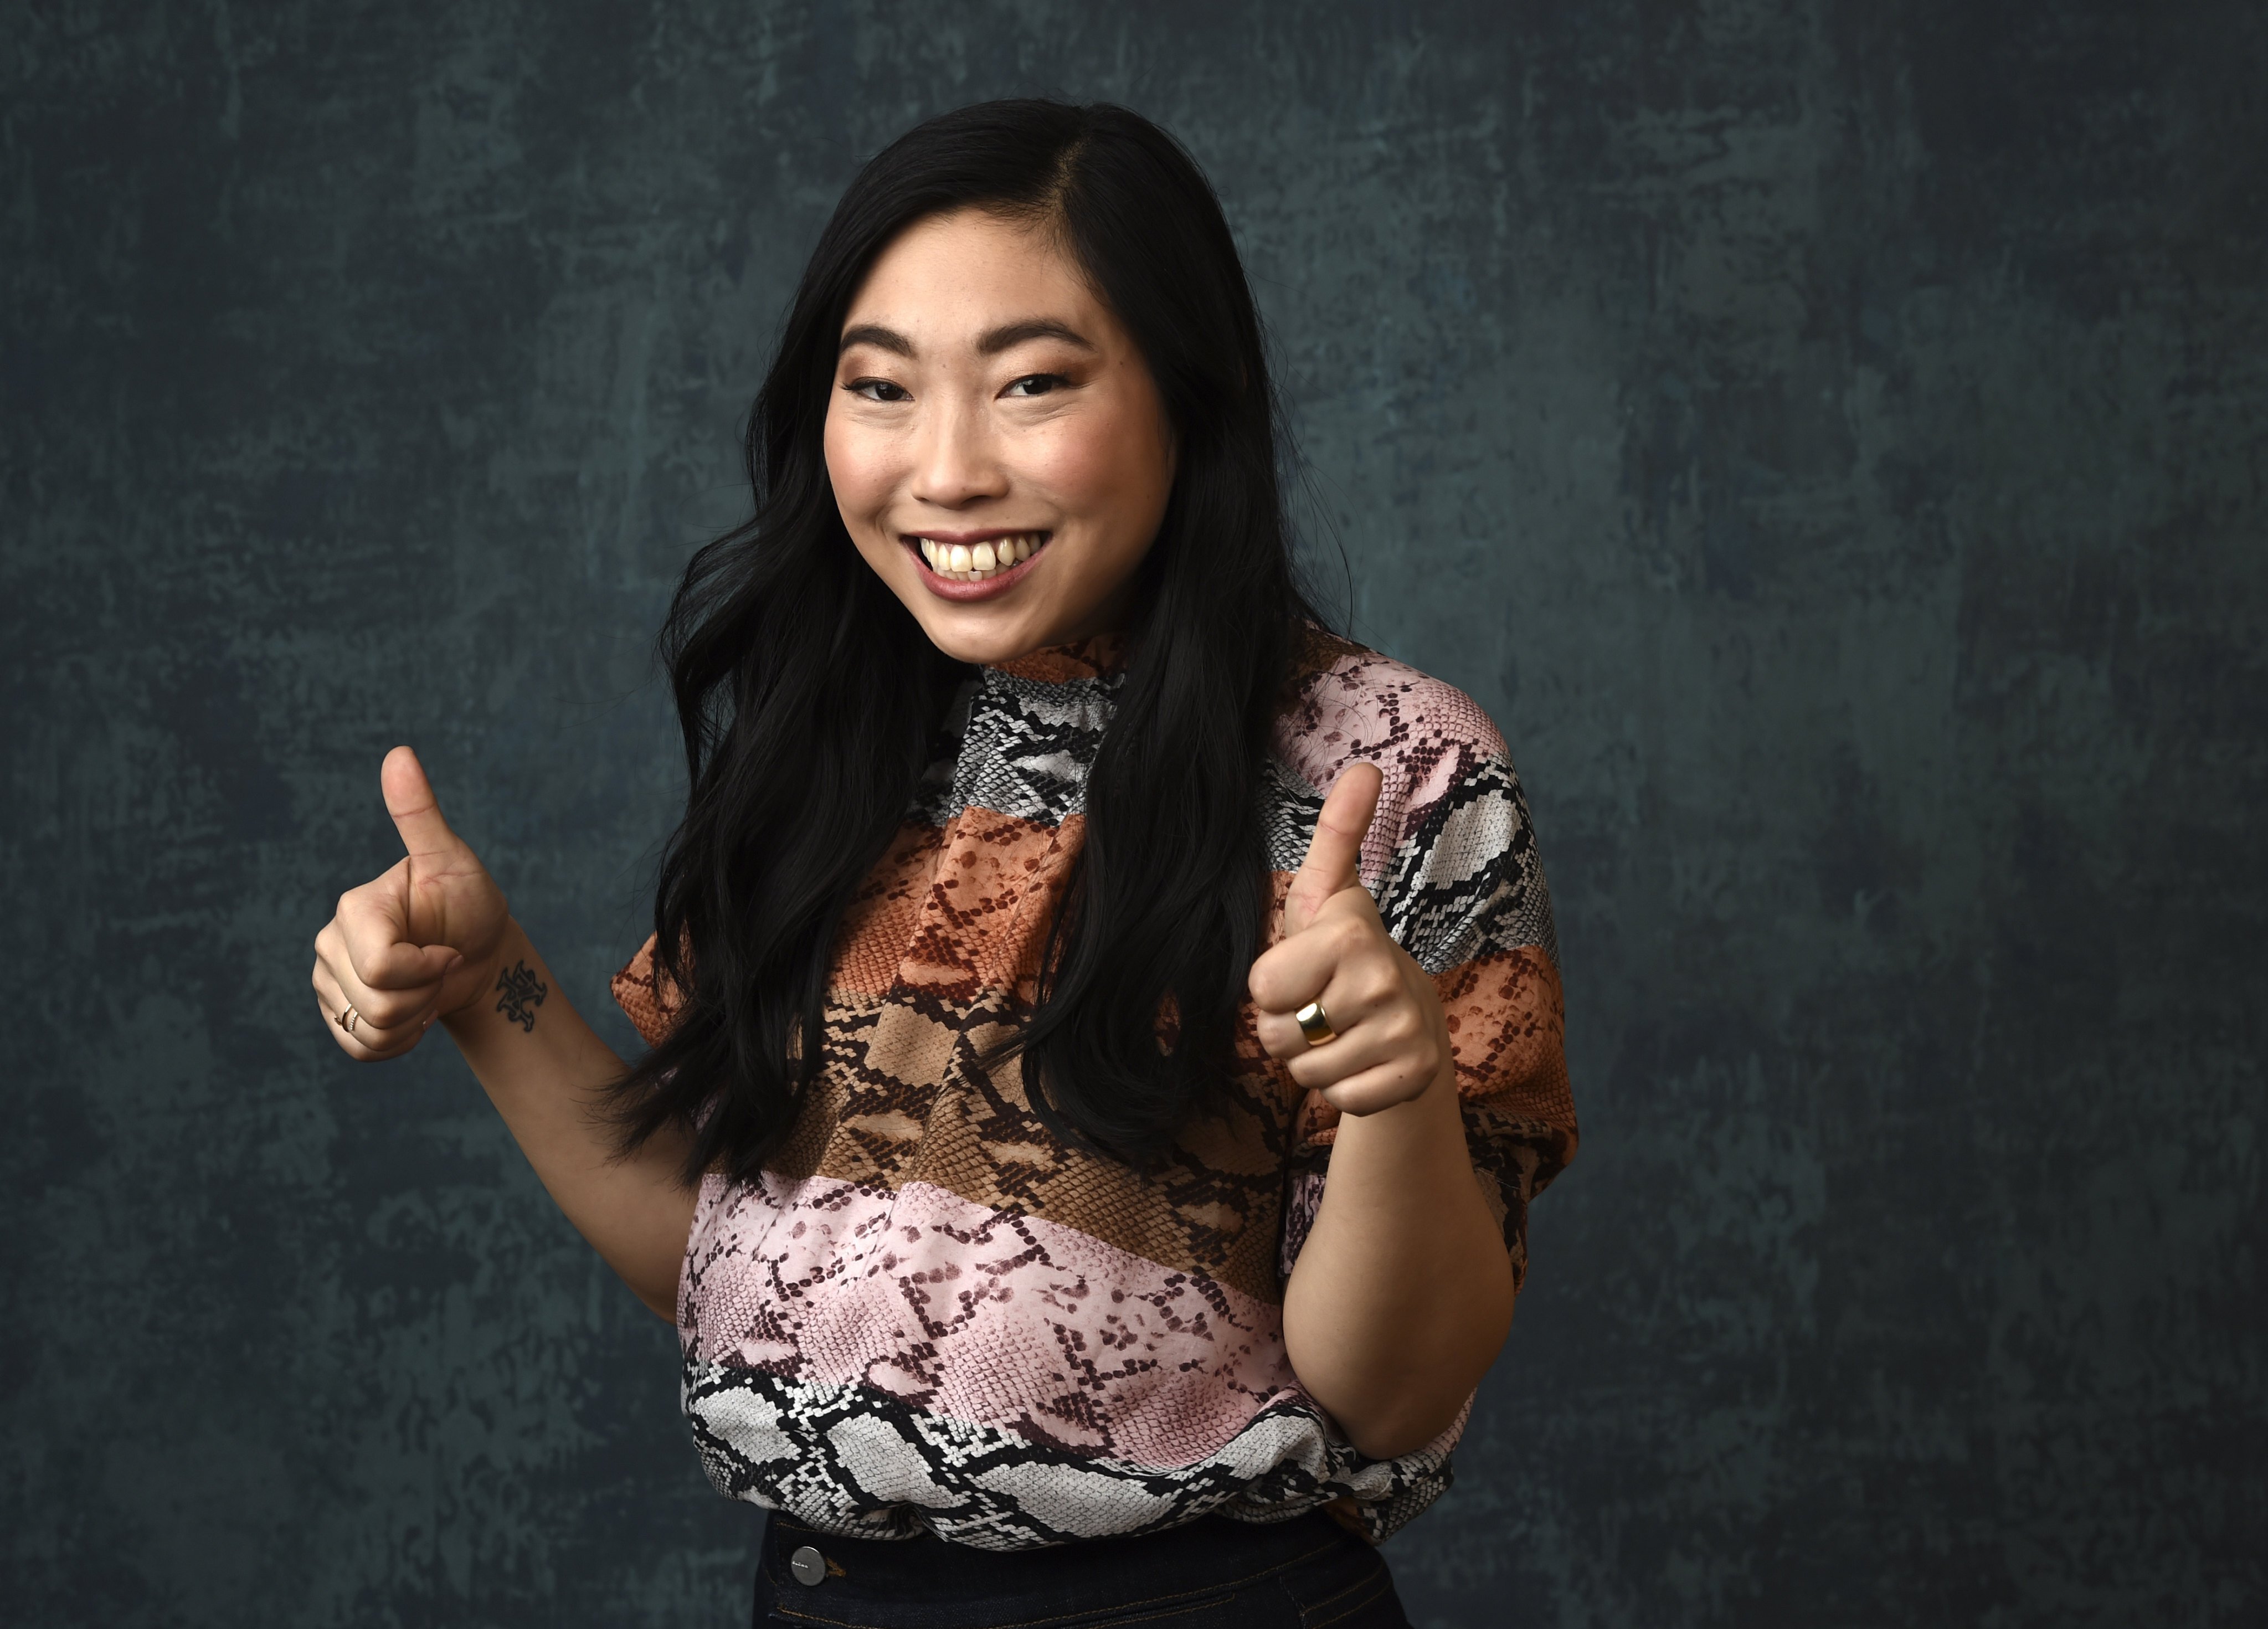 Awkwafina was called out for cultural appropriation for talking with a ‘black accent’. She joins a long list of celebrities accused of insensitivity. Photo: AP/Chris Pizzello